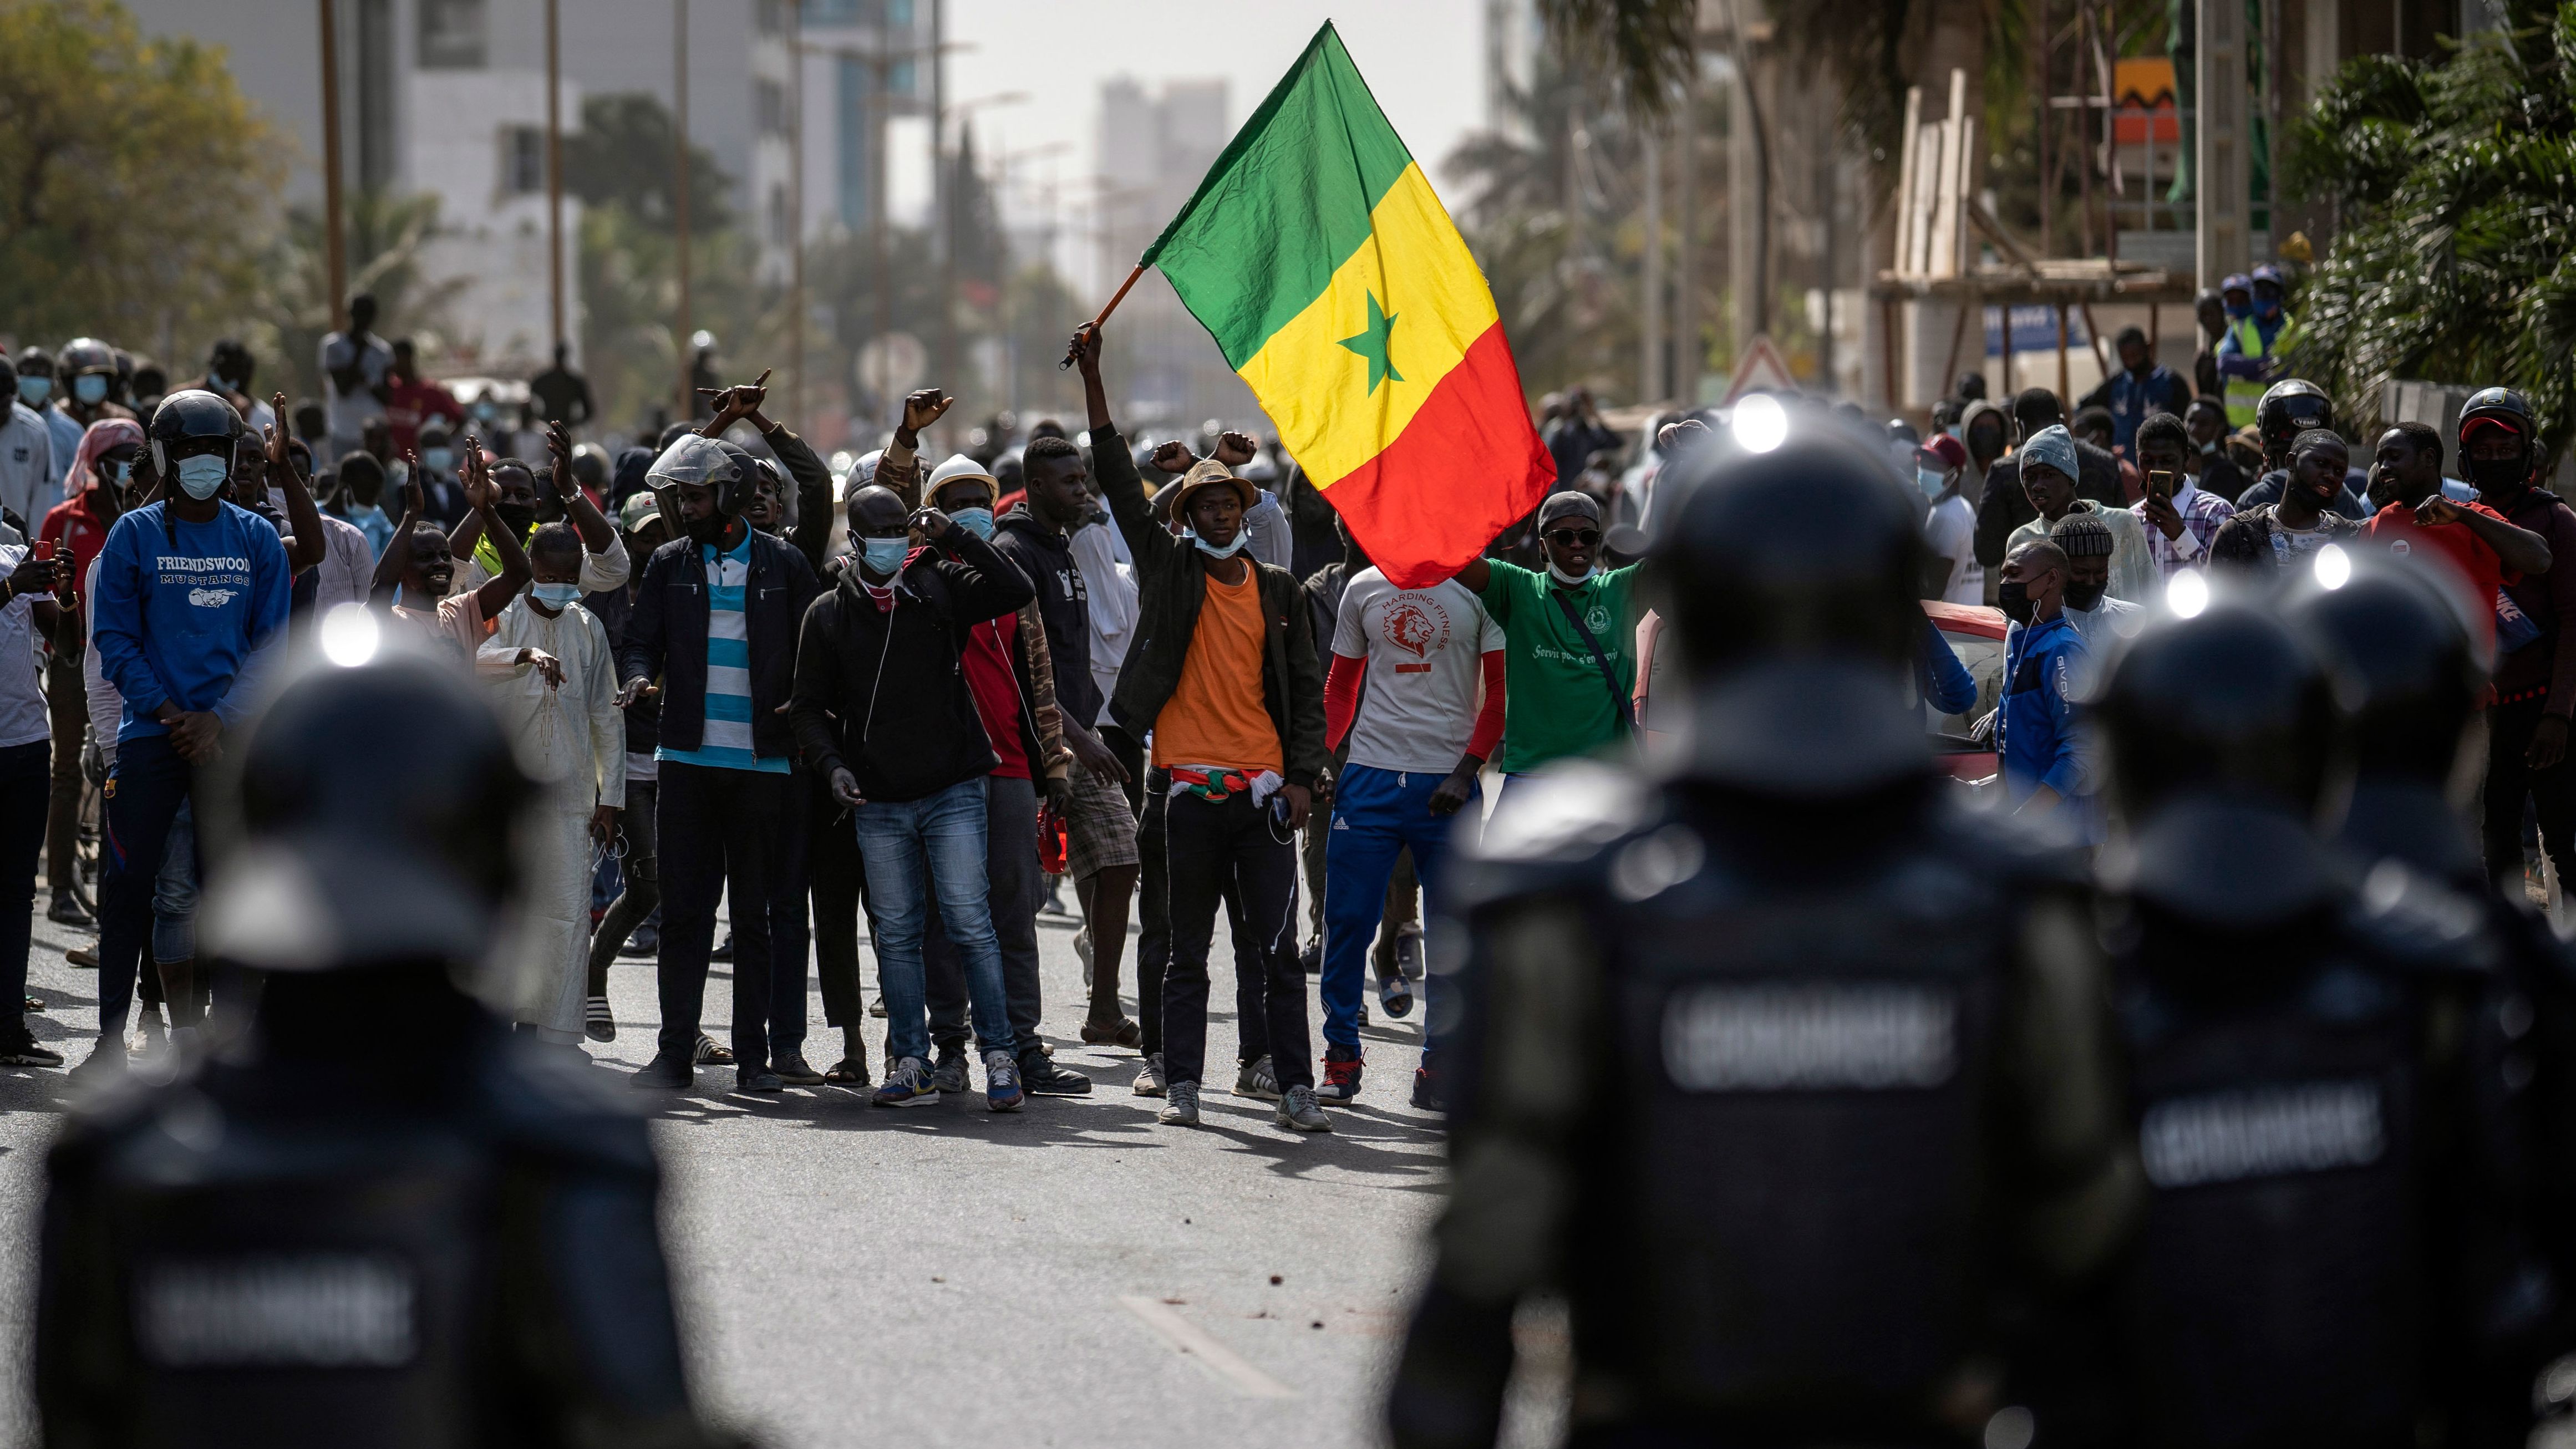 A demonstrator waves a Senegalese national flag during protests in support of main opposition leader and former presidential candidate Ousmane Sonko, who is accused of rape. 